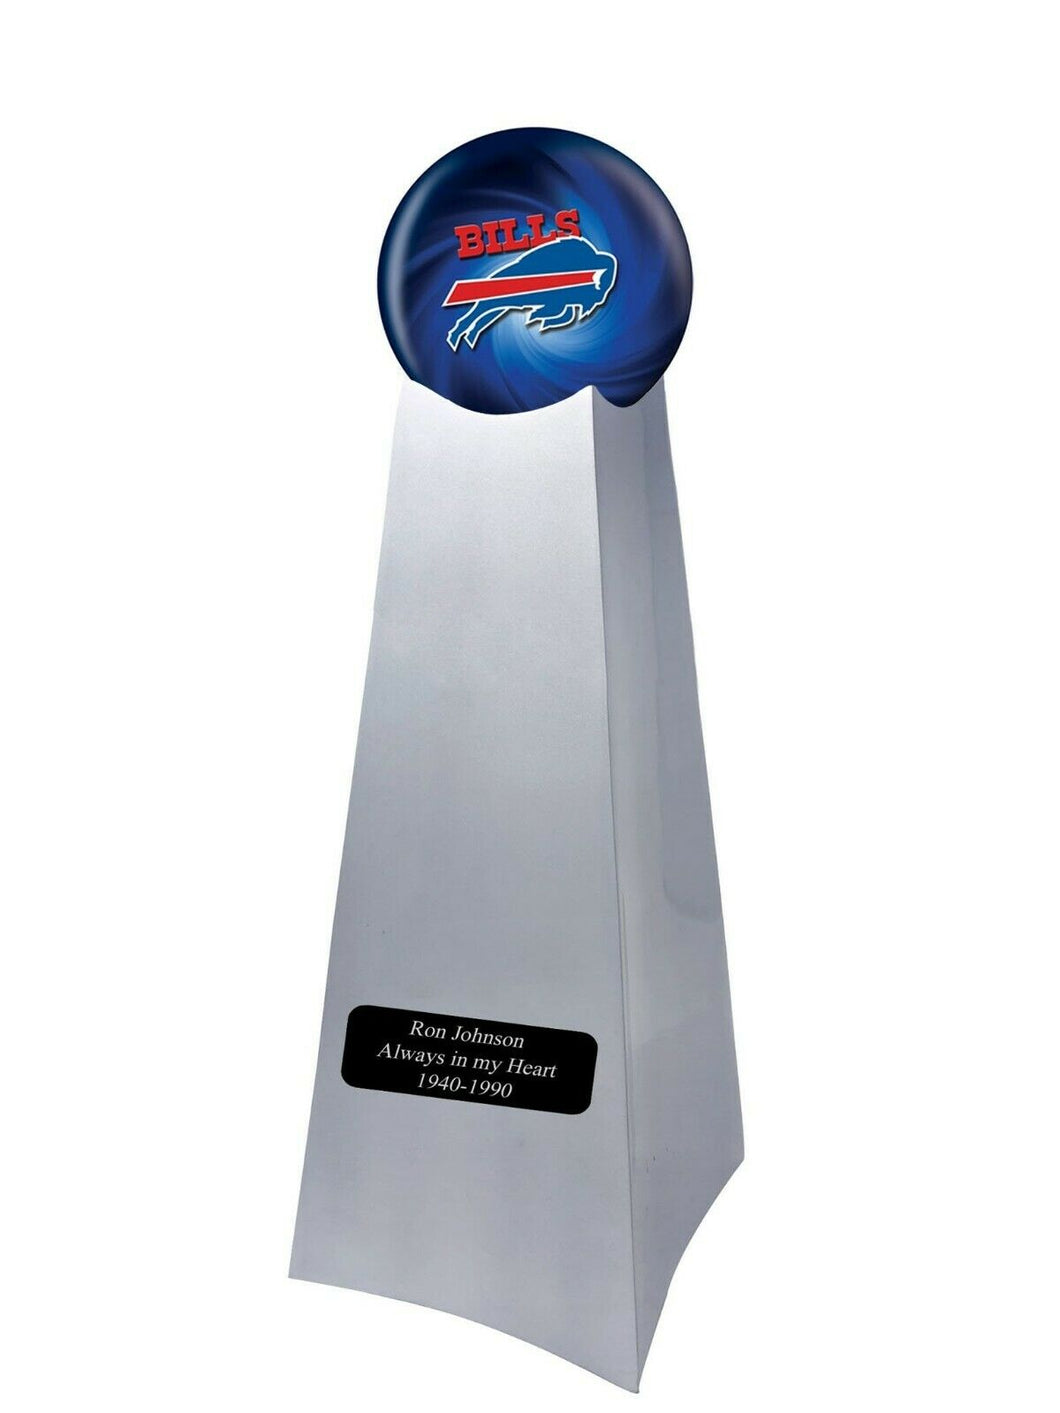 Buffalo Bills Football Championship Trophy Large/Adult Cremation Urn 200 Cubic Inches